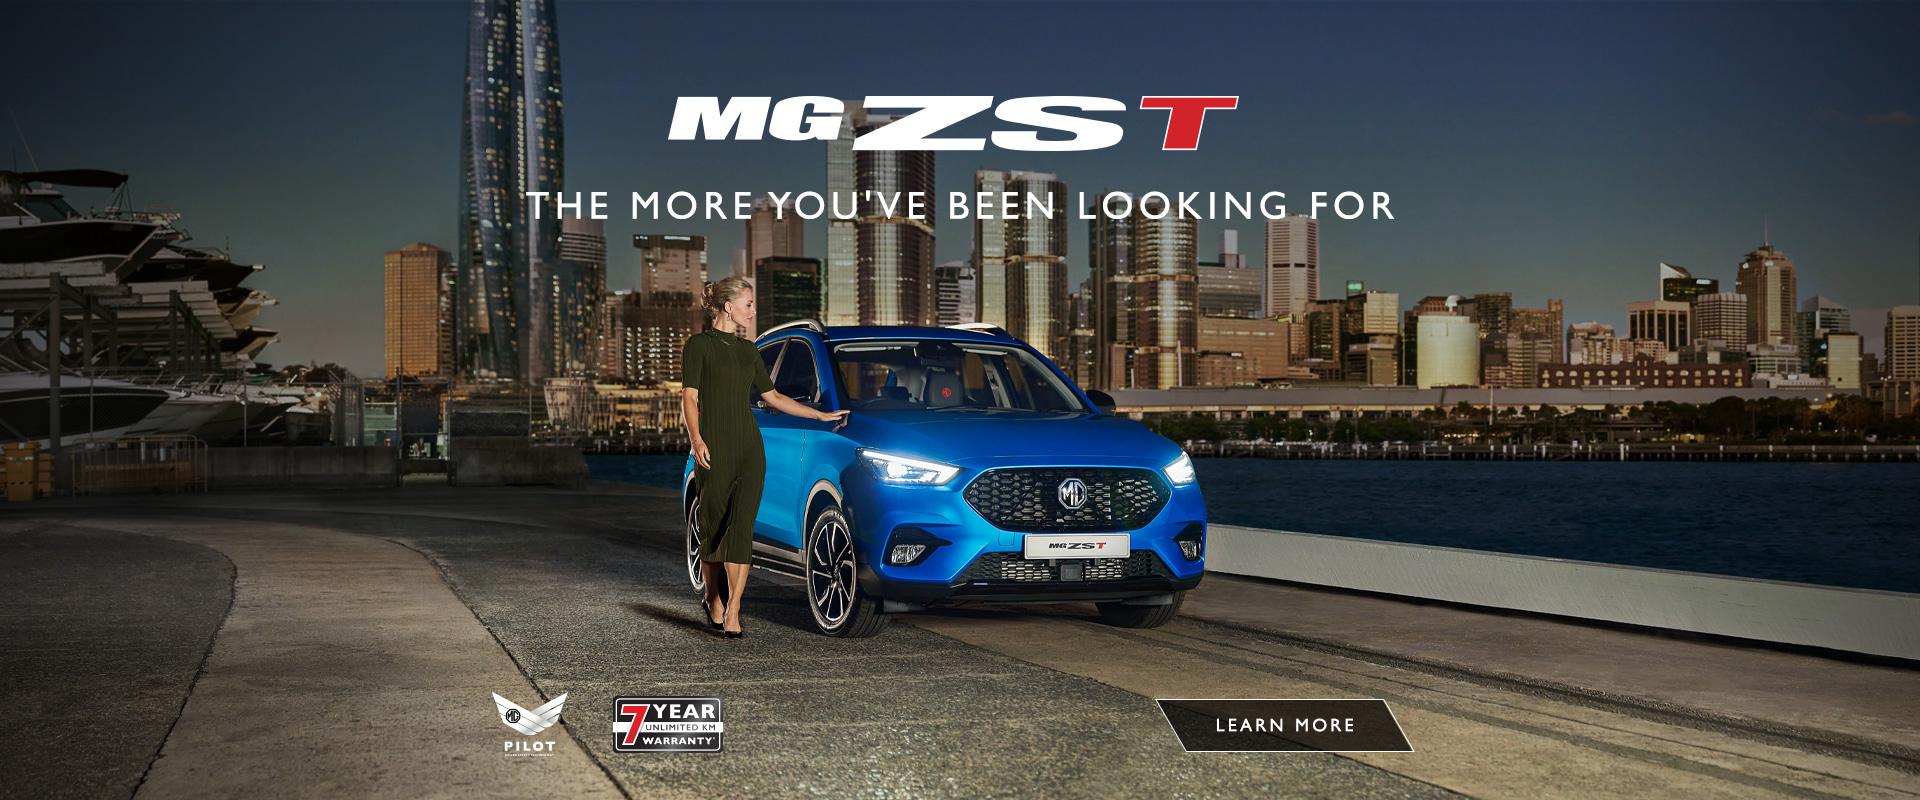 MG ZST. The more you've been looking for.